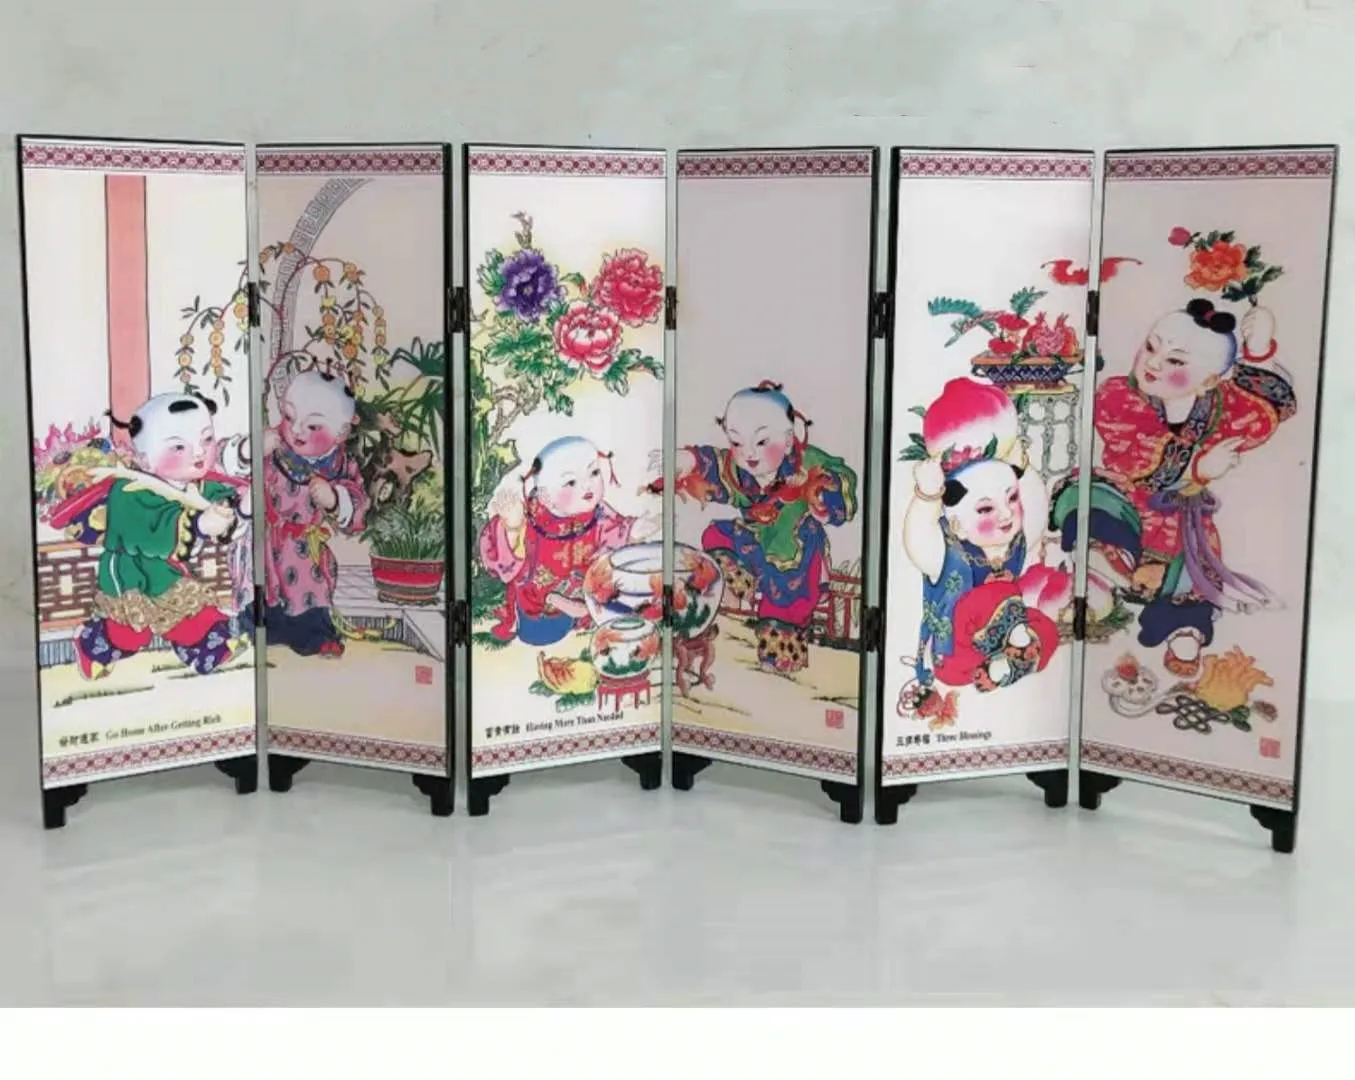 

Lacquerware wood small screens, Willow youth painting, Exquisite crafts gifts and decorations